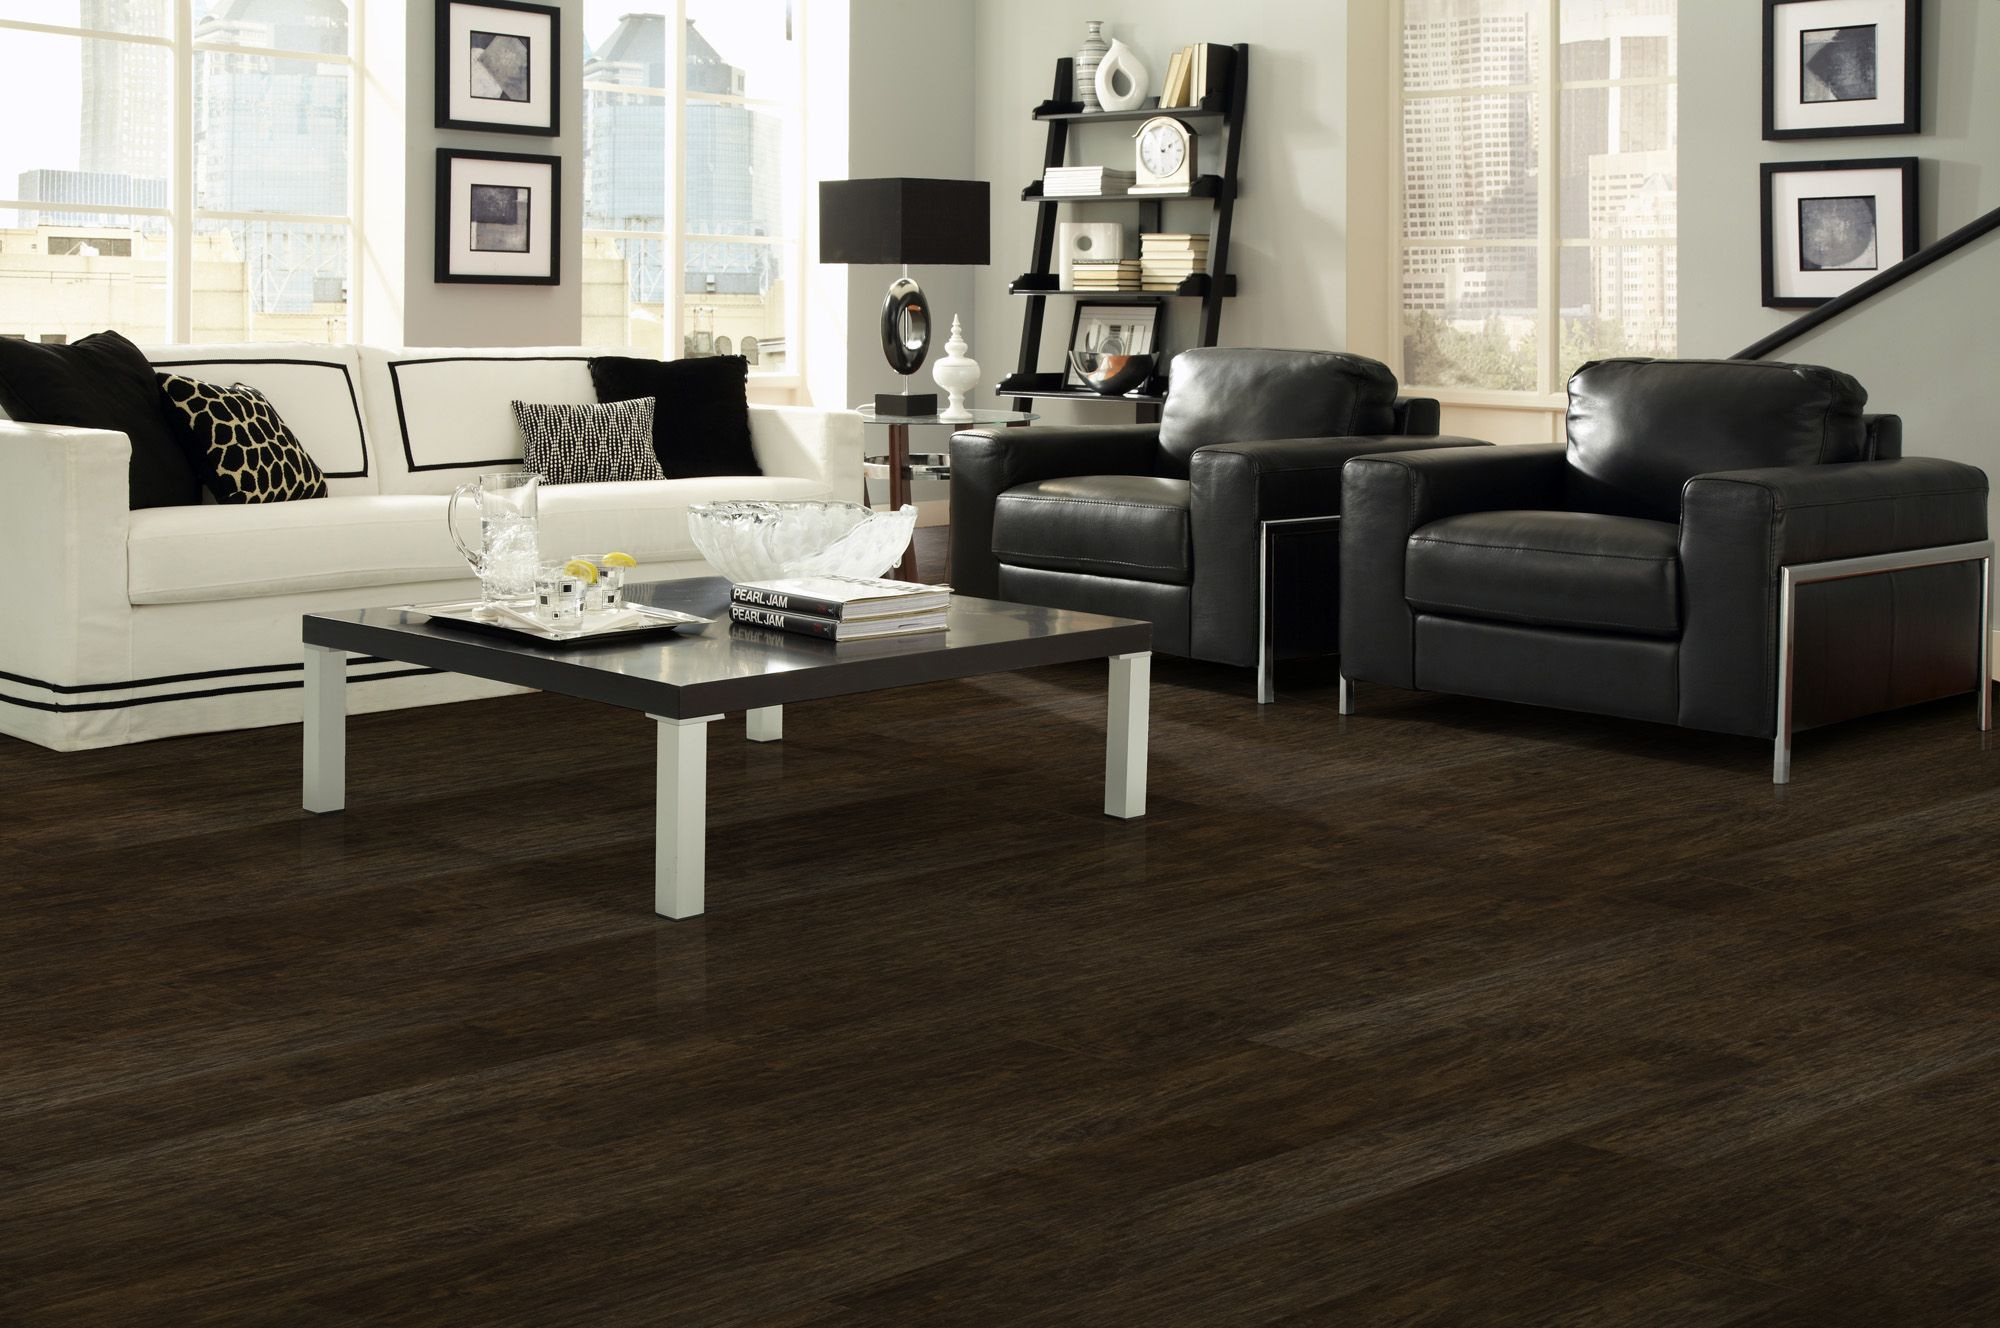 20 Popular Hardwood Floor Refinishing Bowling Green Ky 2024 free download hardwood floor refinishing bowling green ky of black hills hickory a dream home laminate for the home within black hills hickory a dream home laminate